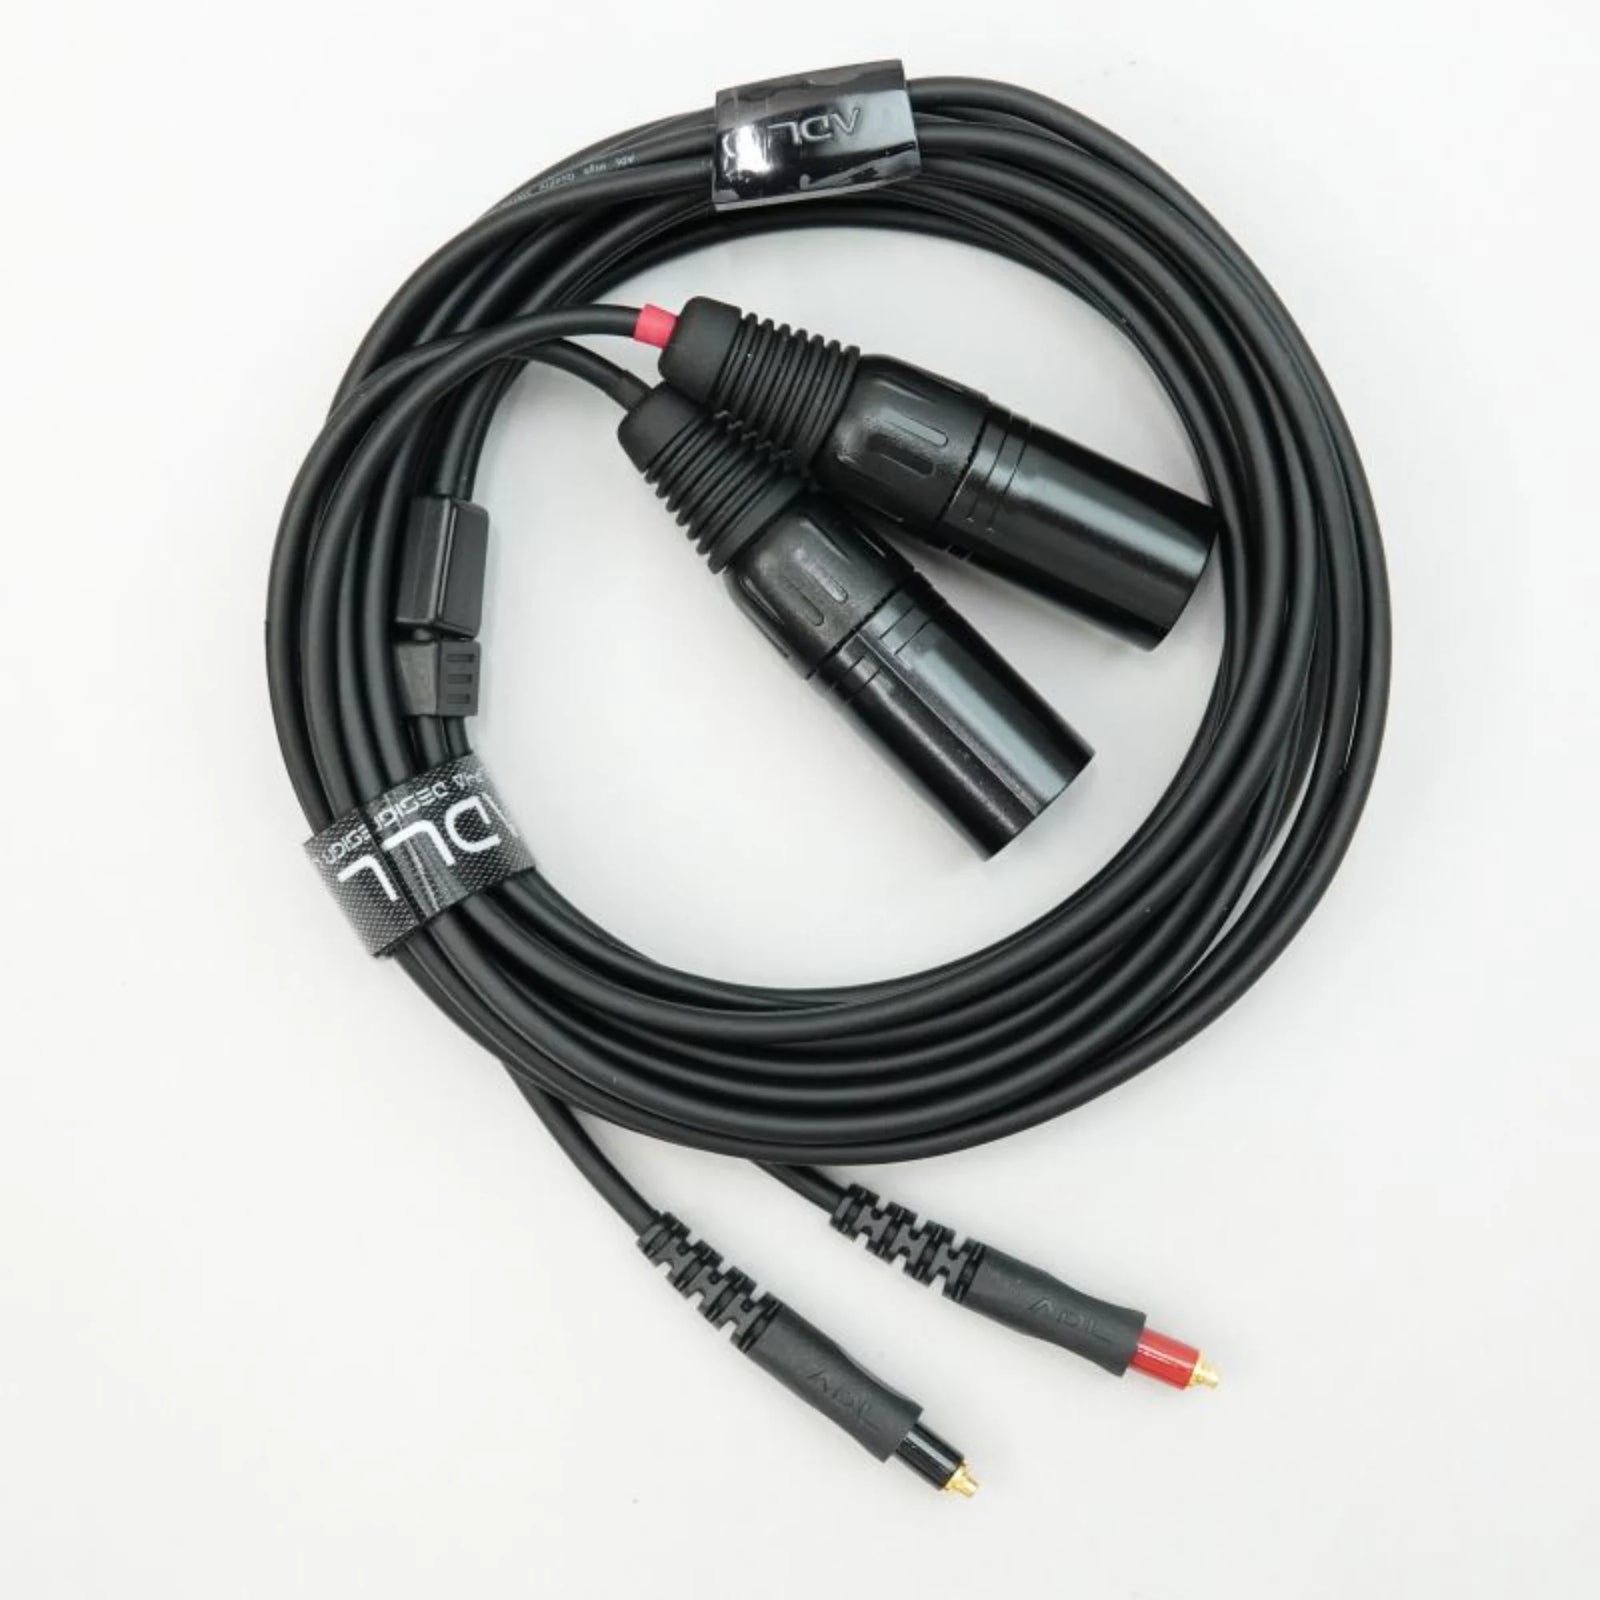 ALPHA DESIGN LABS HEADPHONE CABLE iHP-35ML-1.3m Headphone Cable 6.3mm stereo to MMCX connector (1.3M) iHP-35ML-XLR-1.3m Headphone Cable XLR to MMCX connector (1.3M) iHP-35ML-XLR-3.0m Headphone Cable XLR to MMCX connector (3.0M) Available at Vinyl Sound